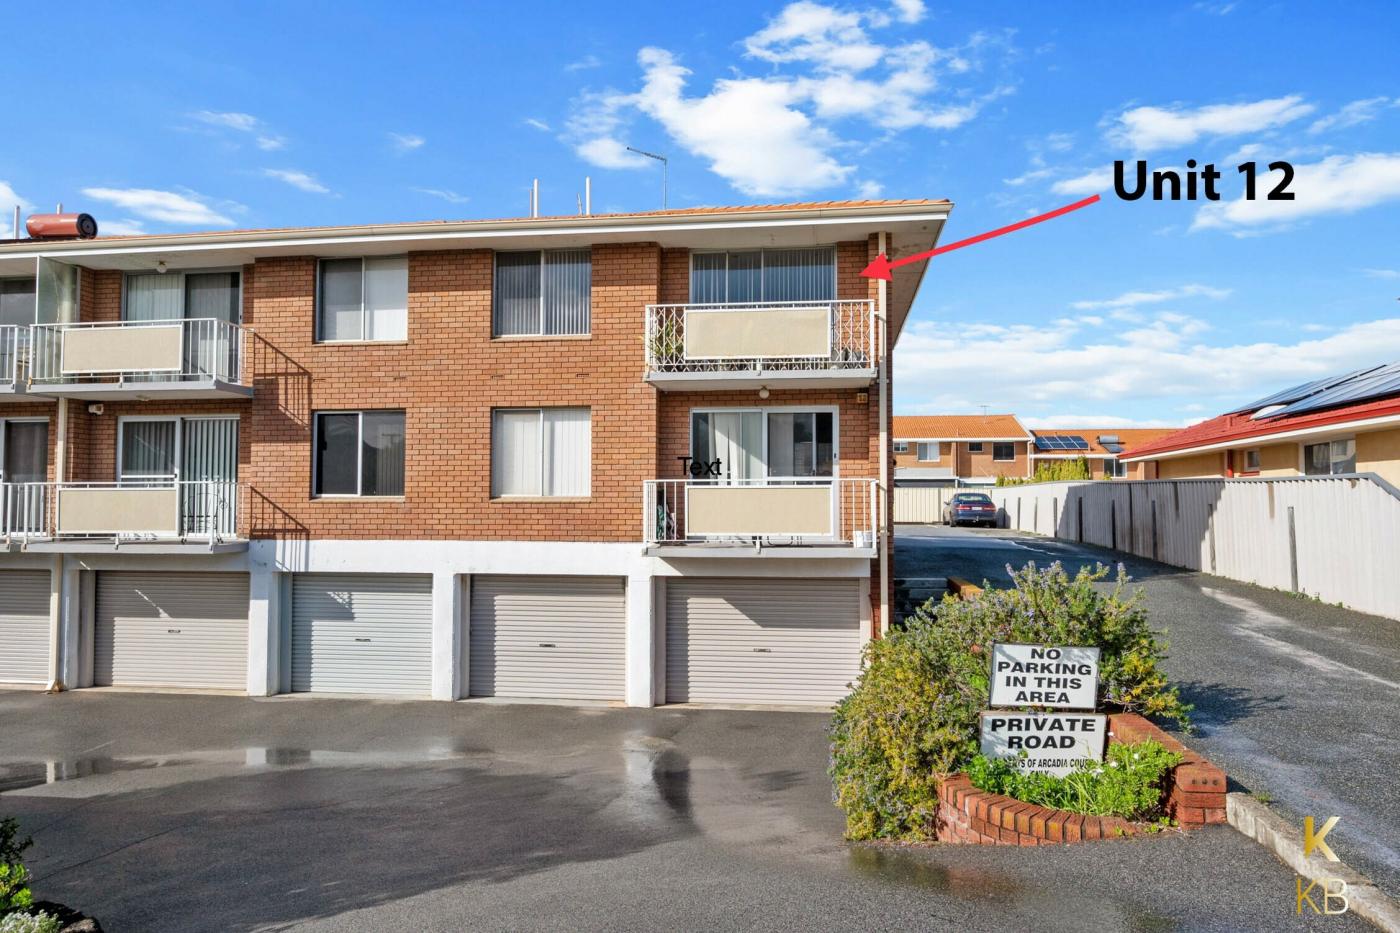 Unit off Penguin Road access offering sea views from the kitchen